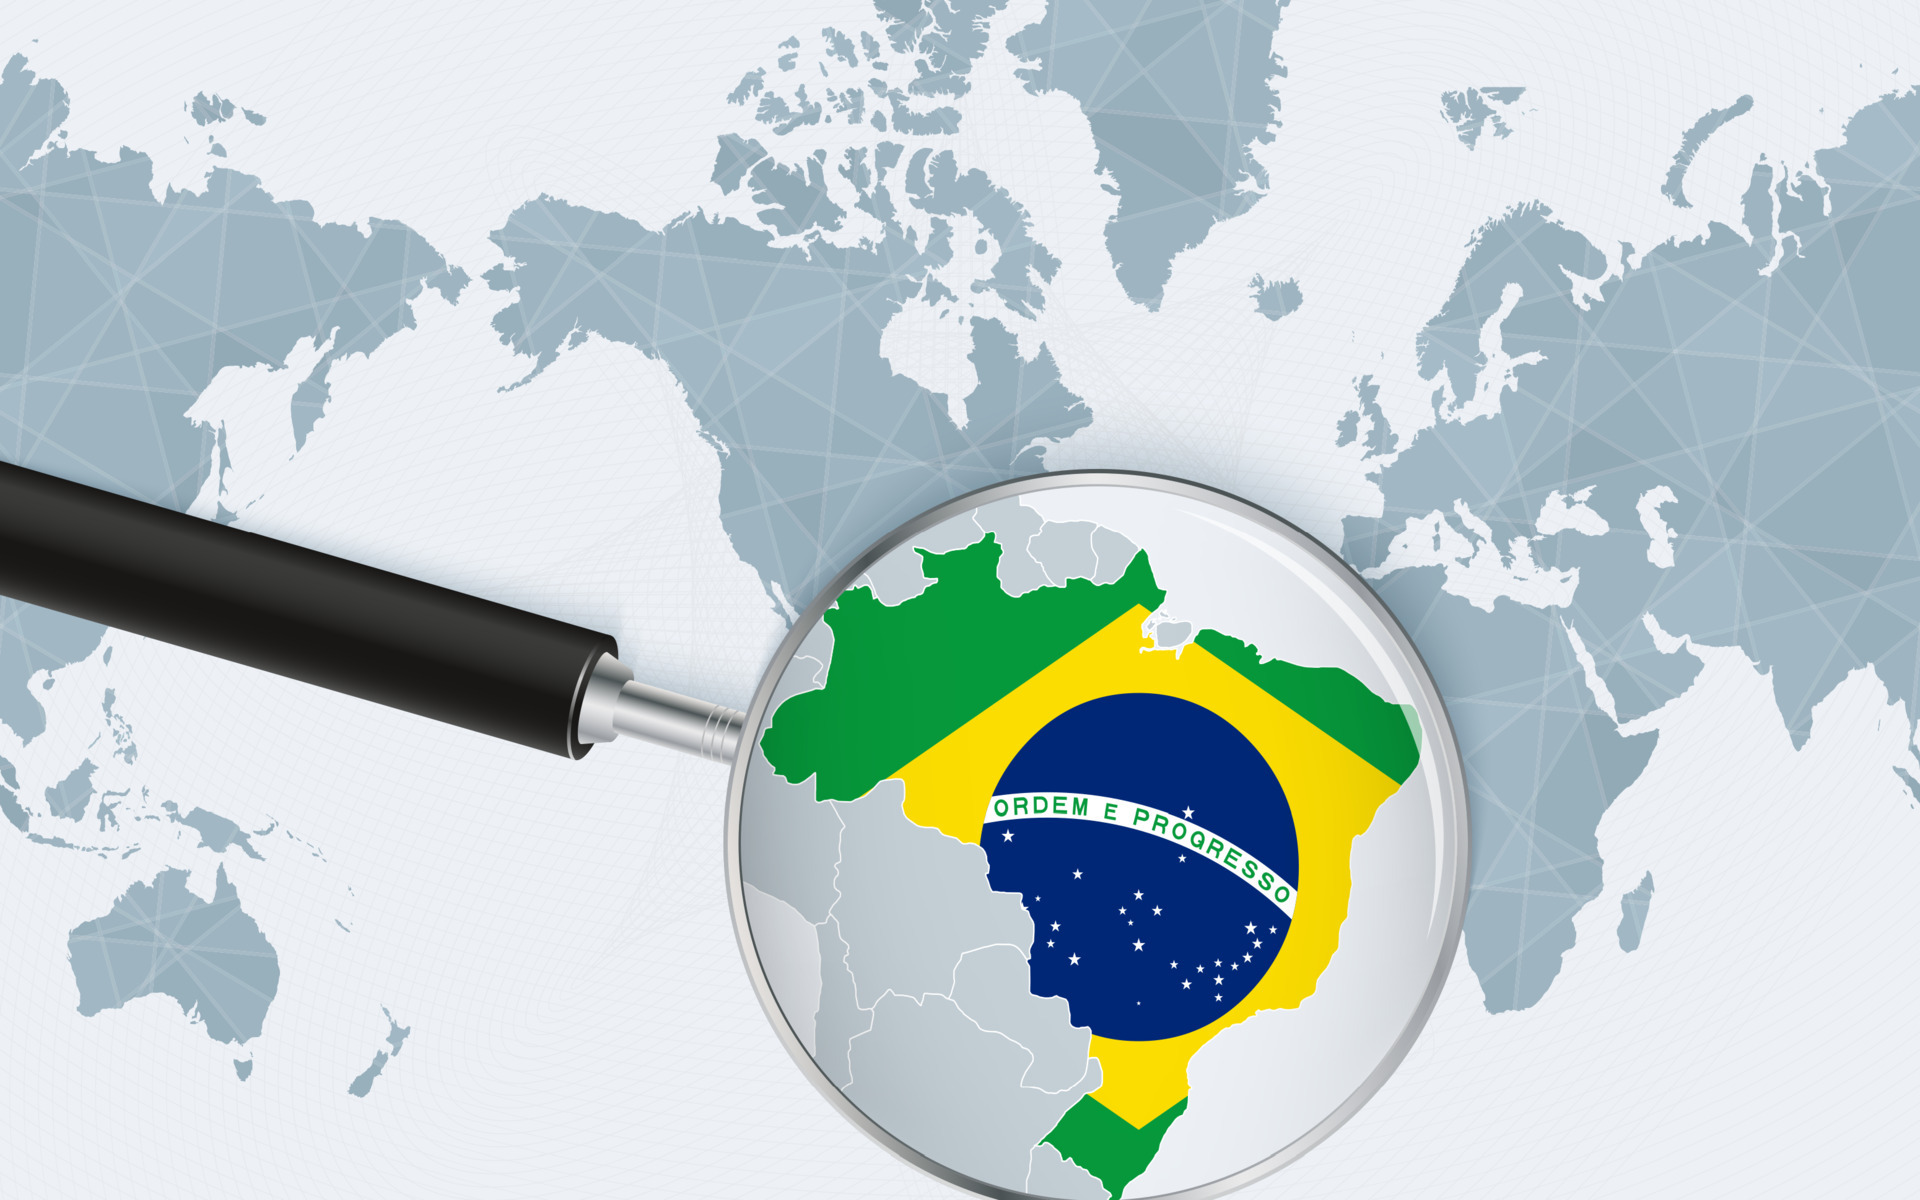 Monetary policymakers, led by Brazilian central banker Roberto Campos Neto, will raise the Selic rate by half a percentage point on August 3 and then leave the door open to a 25 basis point increase in September, analysts Casiana Fernandez and Vinicius Moreira wrote in a note.